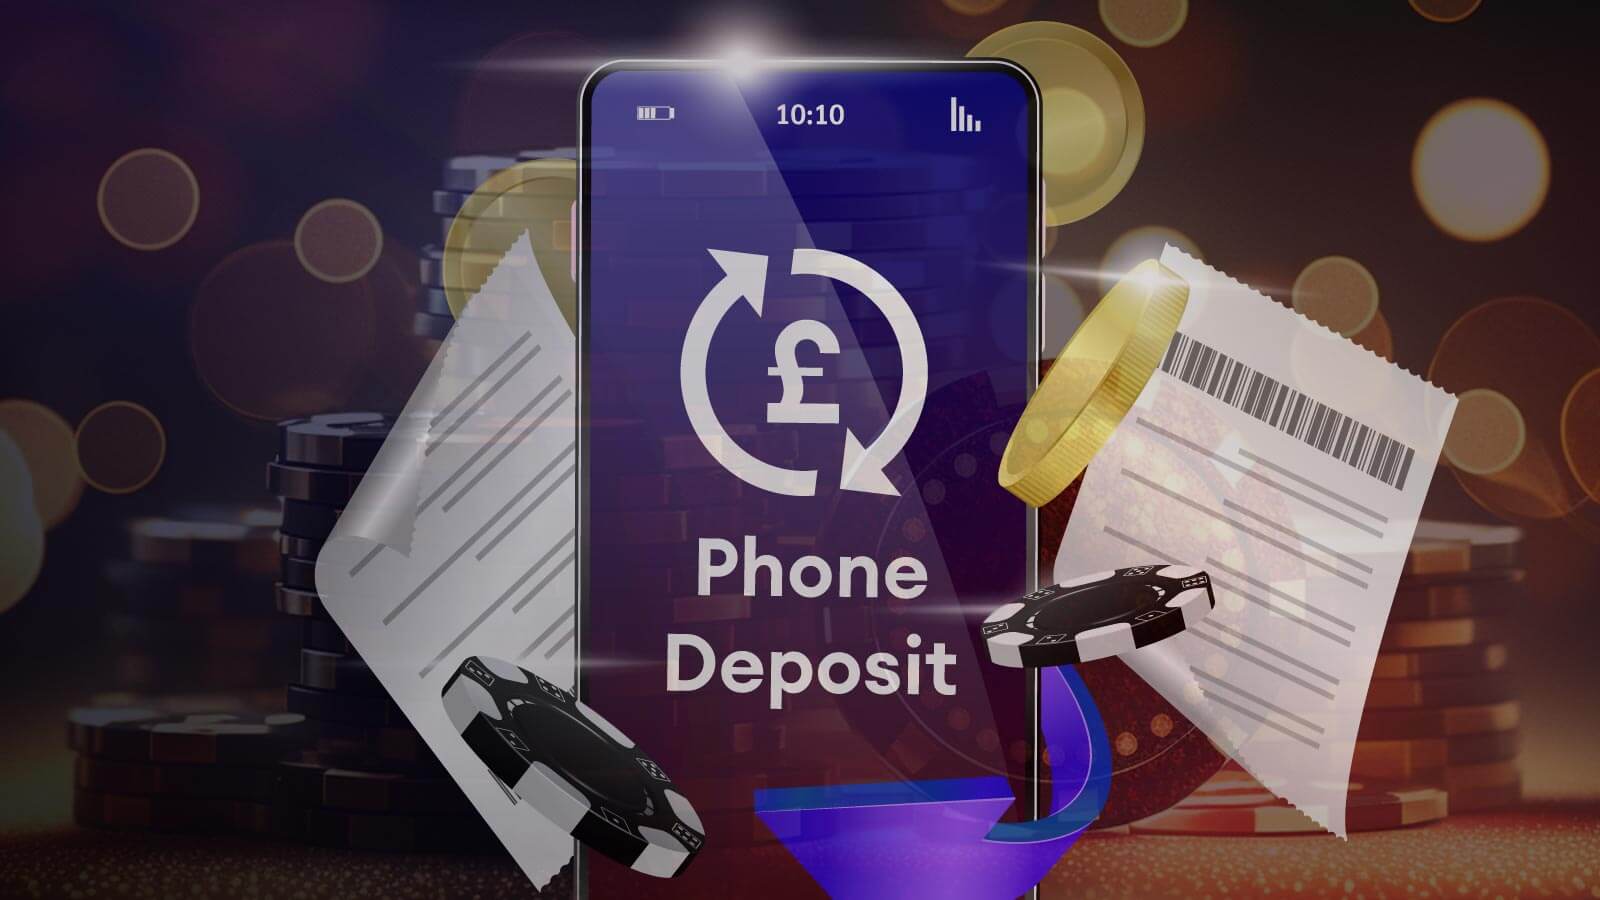 Phone Deposit Charge Your Next Deposit to Your Phone Bill